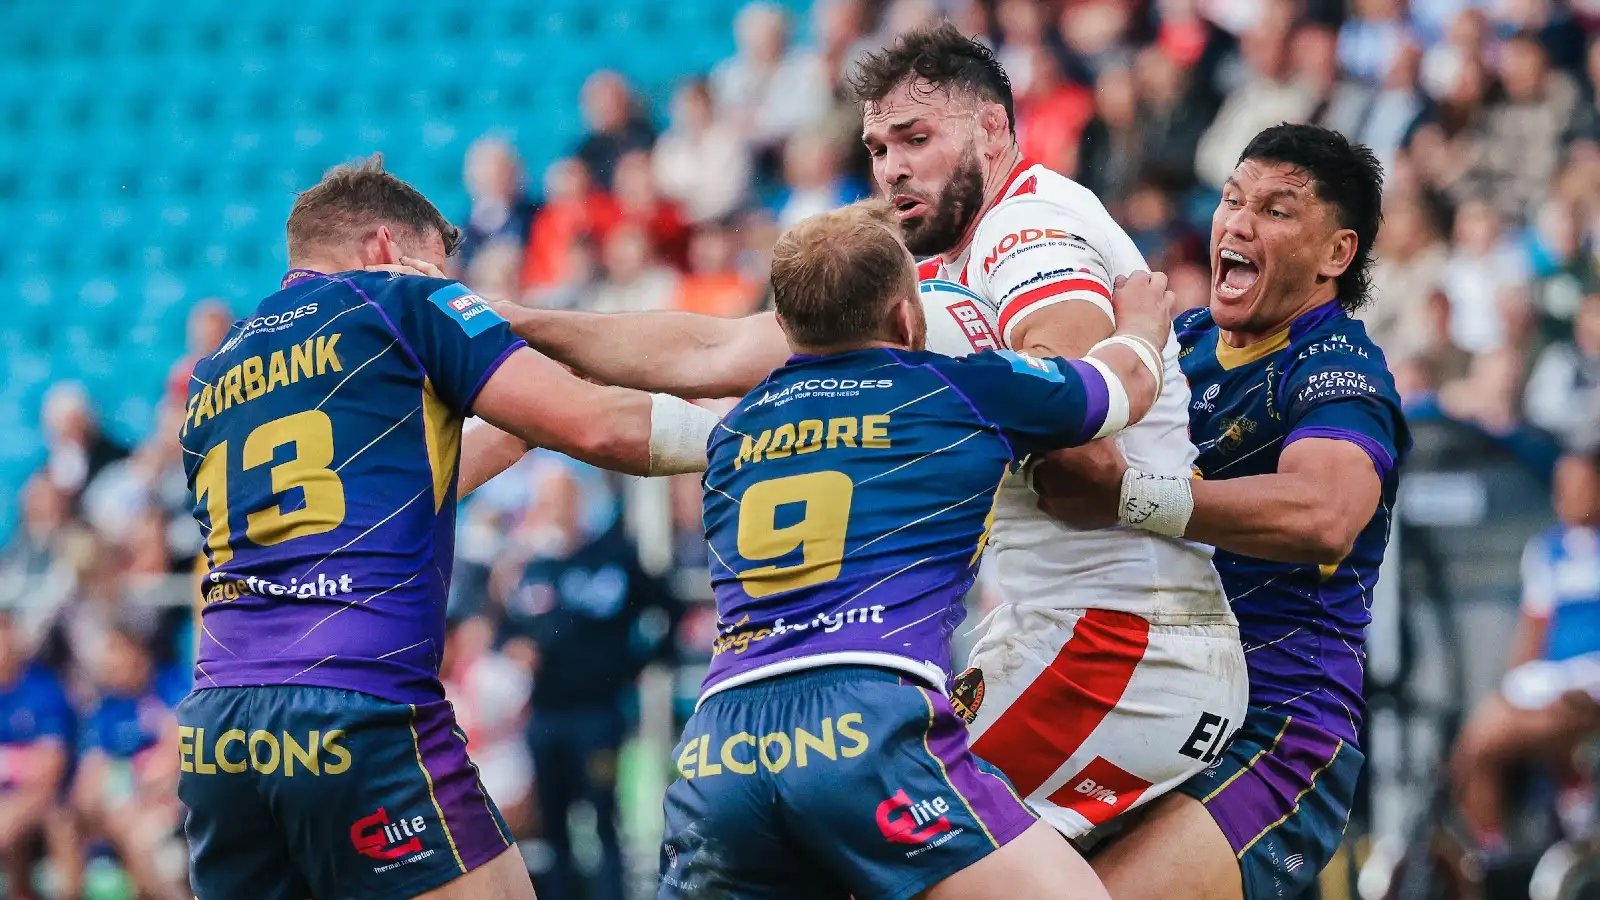 Forward handed three-match ban following incidents in St Helens defeat